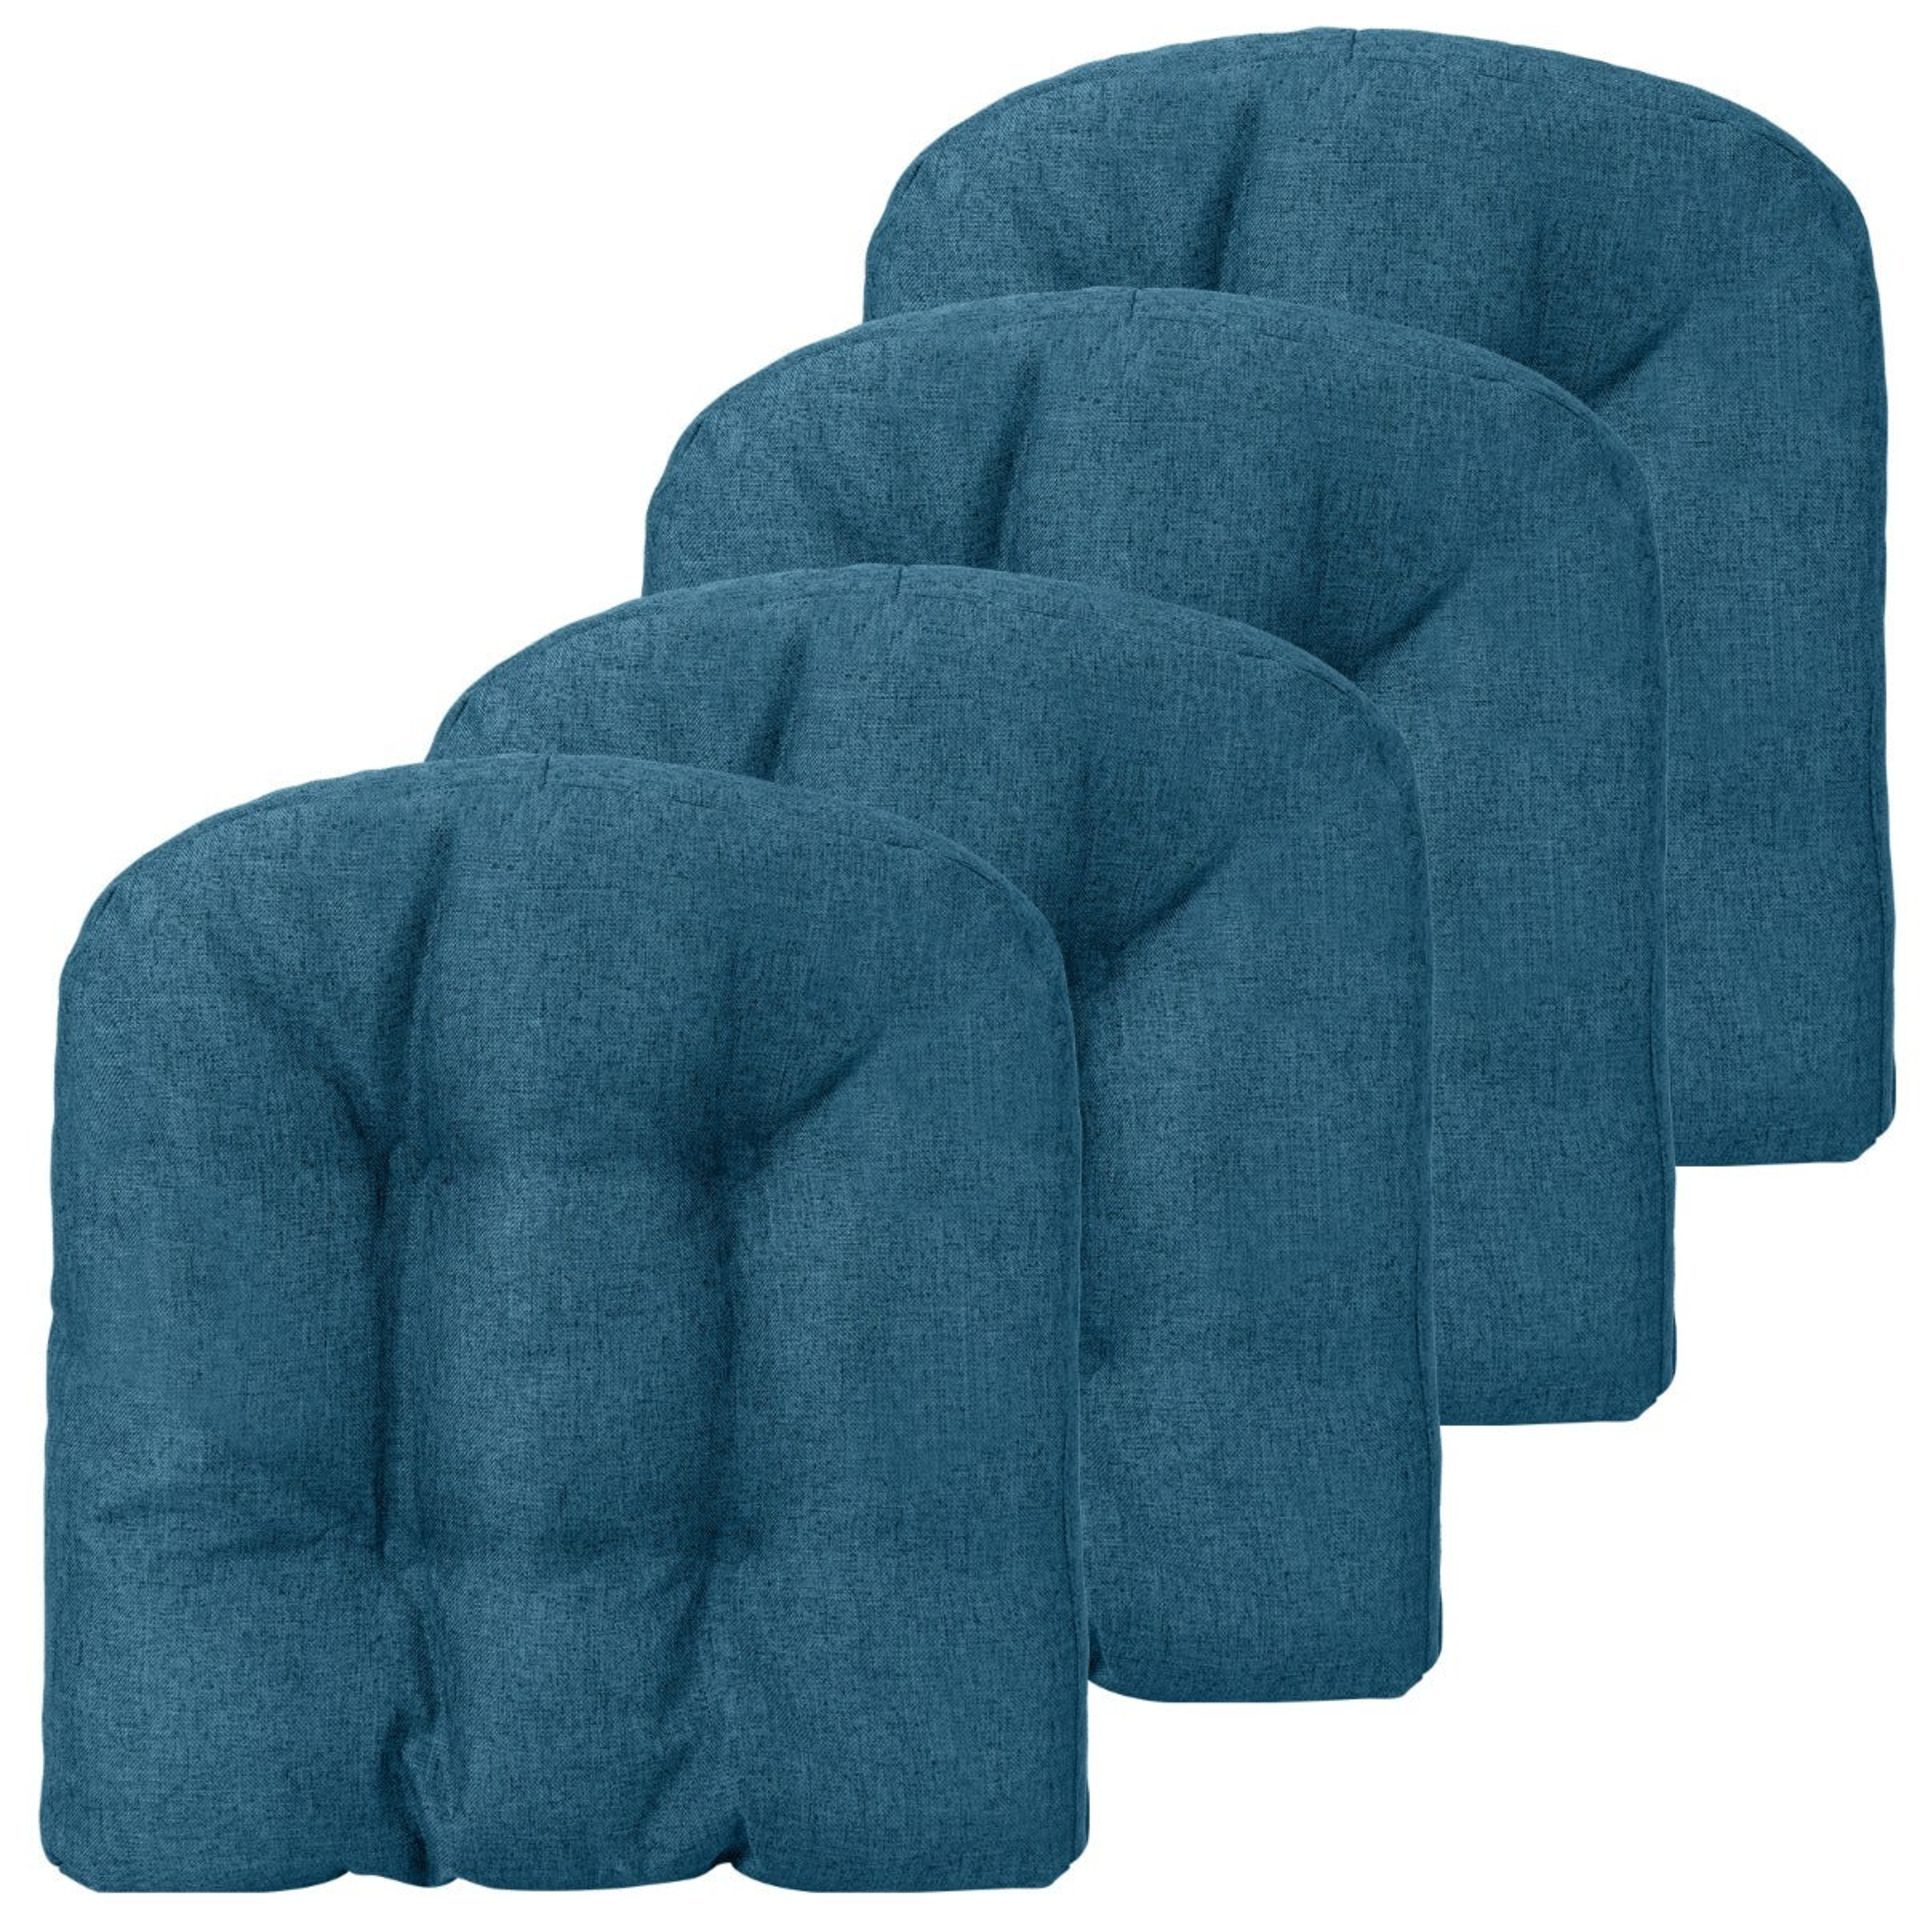 Set of 4 Tufted Seat Chair Cushions with Non-Slip Backing - ER53